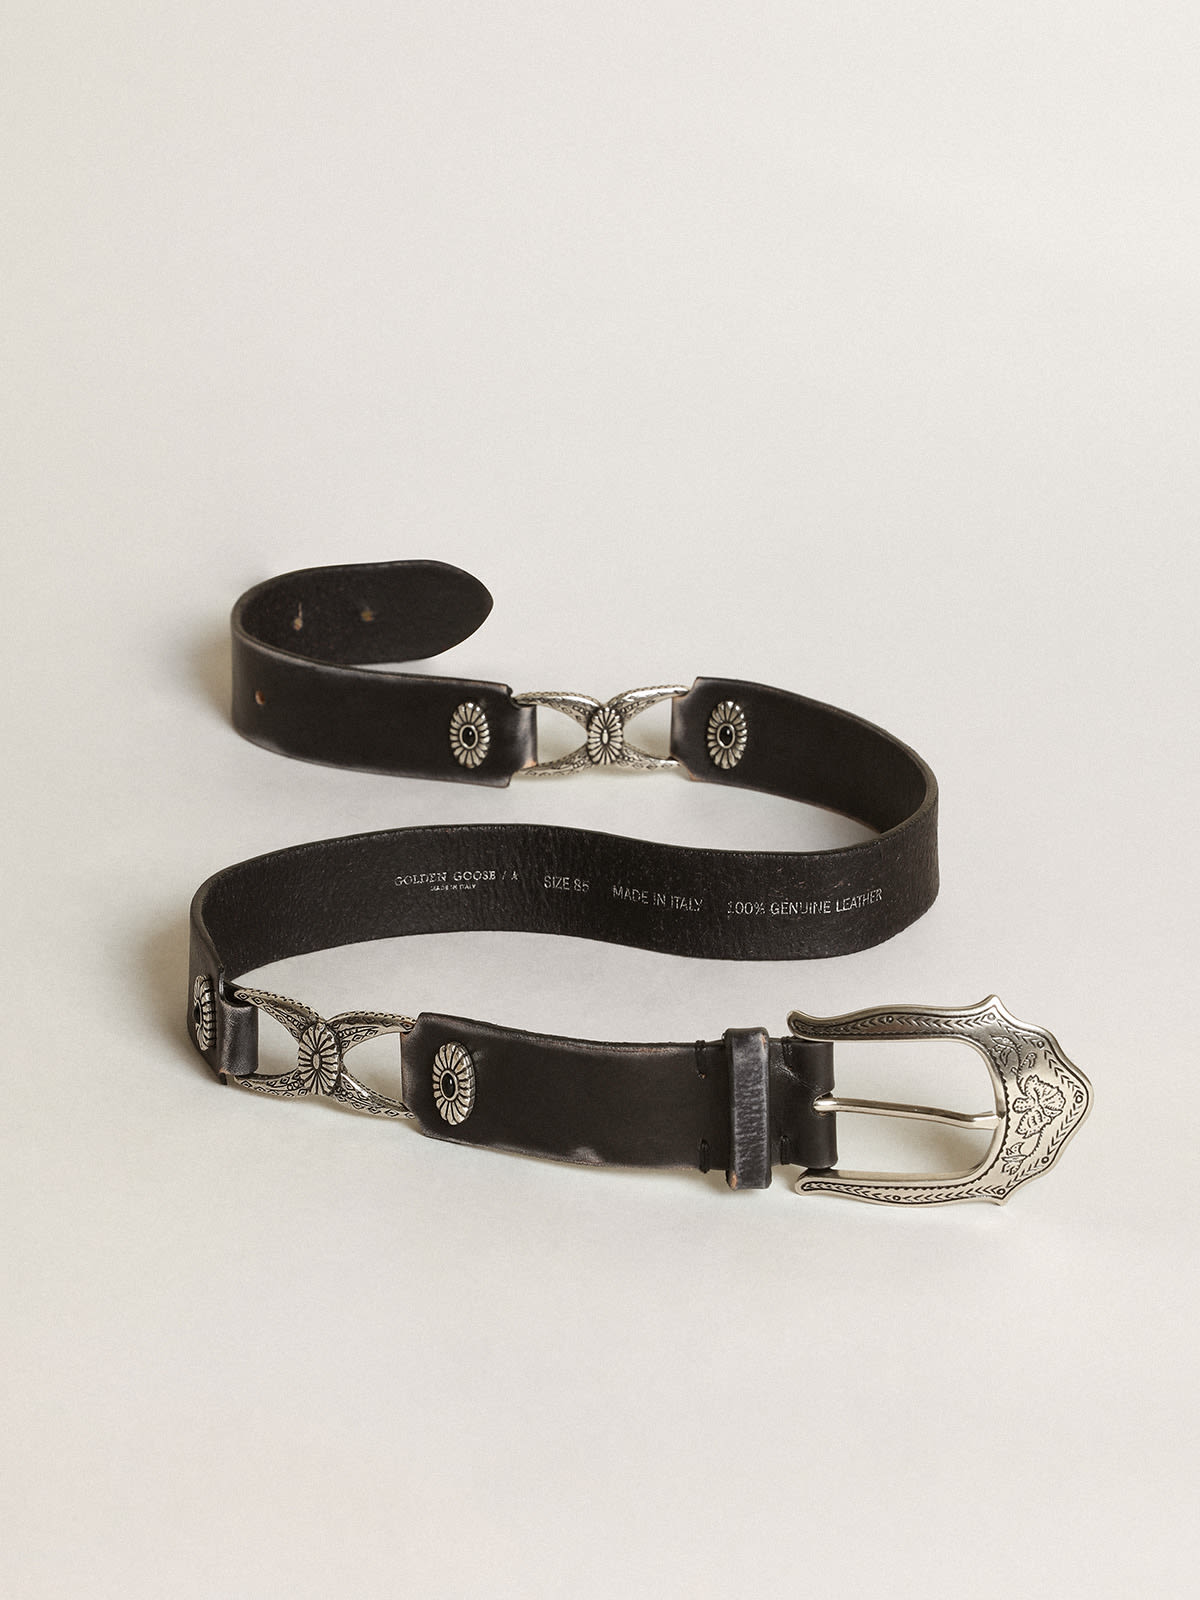 Golden Goose - Women's belt in black leather with silver decorations in 